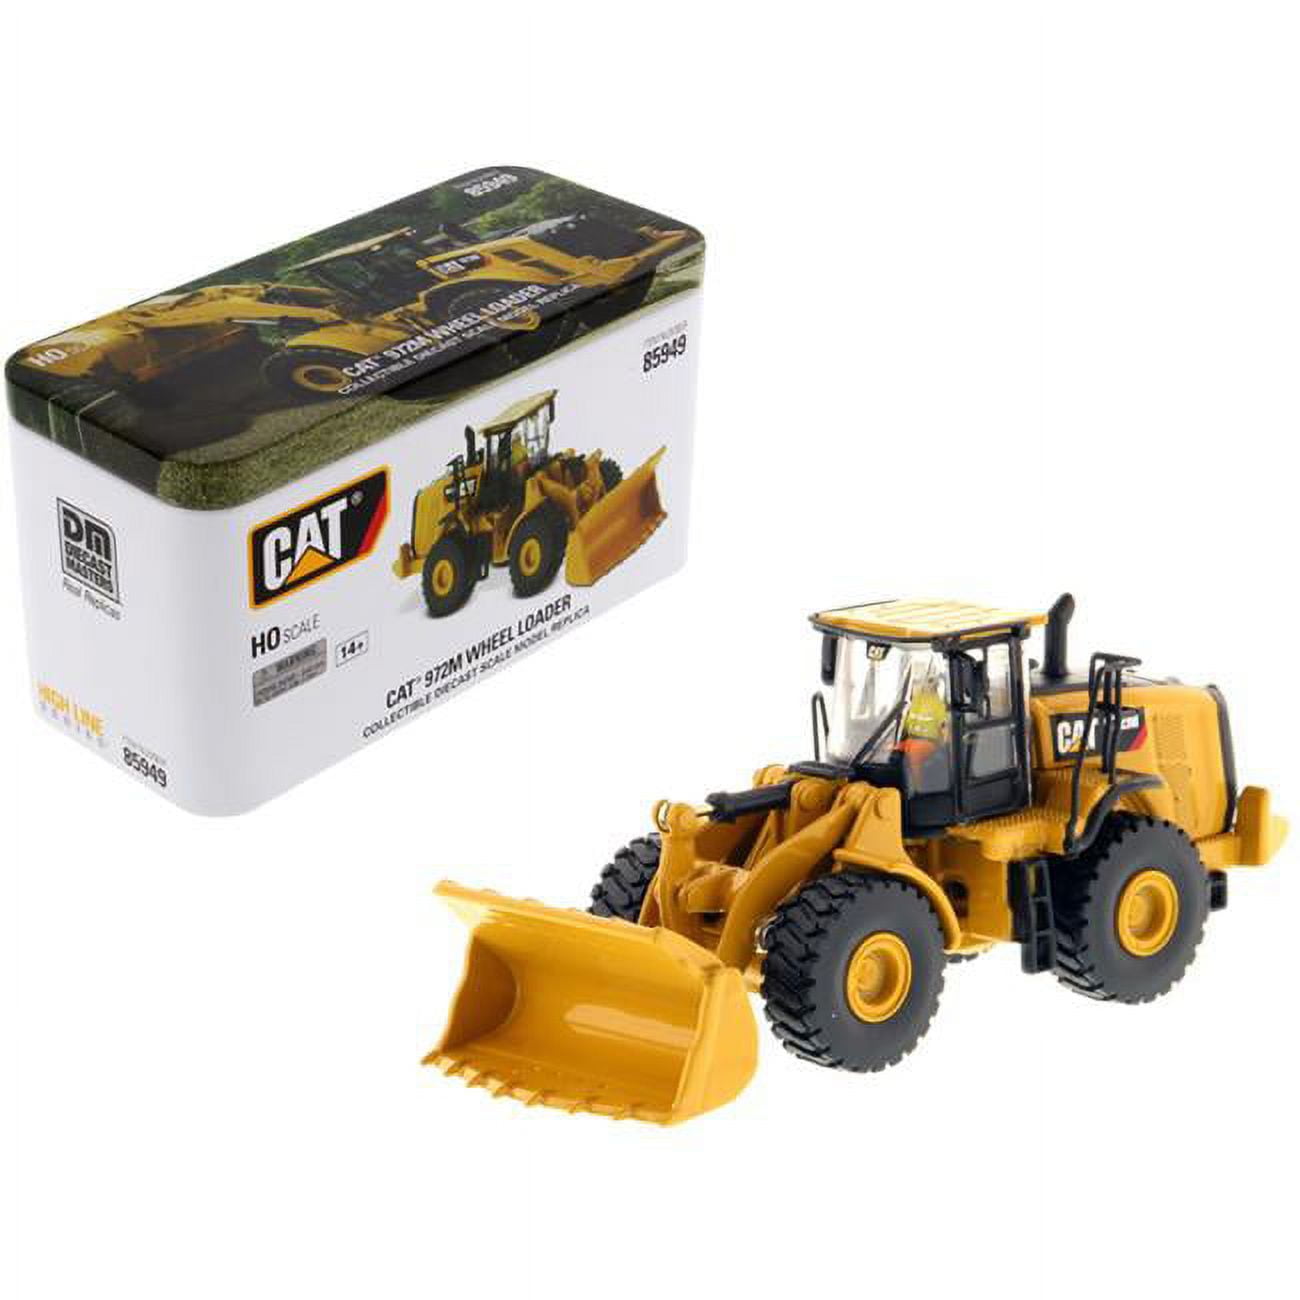 85949 Cat Caterpillar 972m Wheel Loader With Operator High Line Series 1-87 Ho Scale Diecast Model